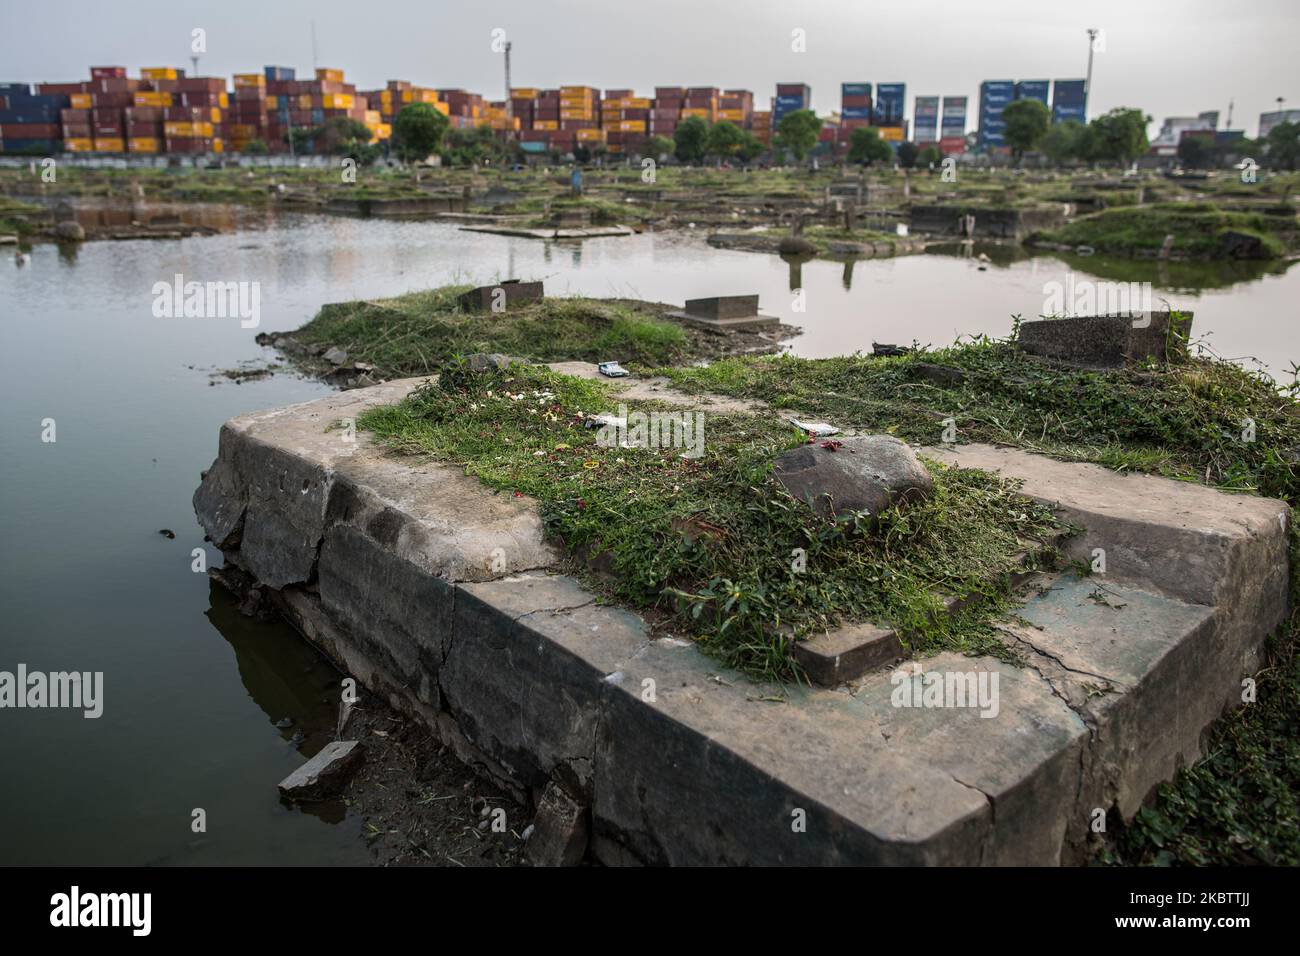 A view of public cemetery which submerged by flood waters from rising sea levels on July 18, 2020 in North Jakarta, Indonesia. Since the 1970s, parts of Jakarta have sunk more than four metres, at a rate of up to 25 centimetres a year. The Indonesian capital of Jakarta is home to 10 million people but it is also one of the fastest-sinking cities in the world. About 40 percent of Jakarta now lies below sea level. (Photo by Afriadi Hikmal/NurPhoto) Stock Photo